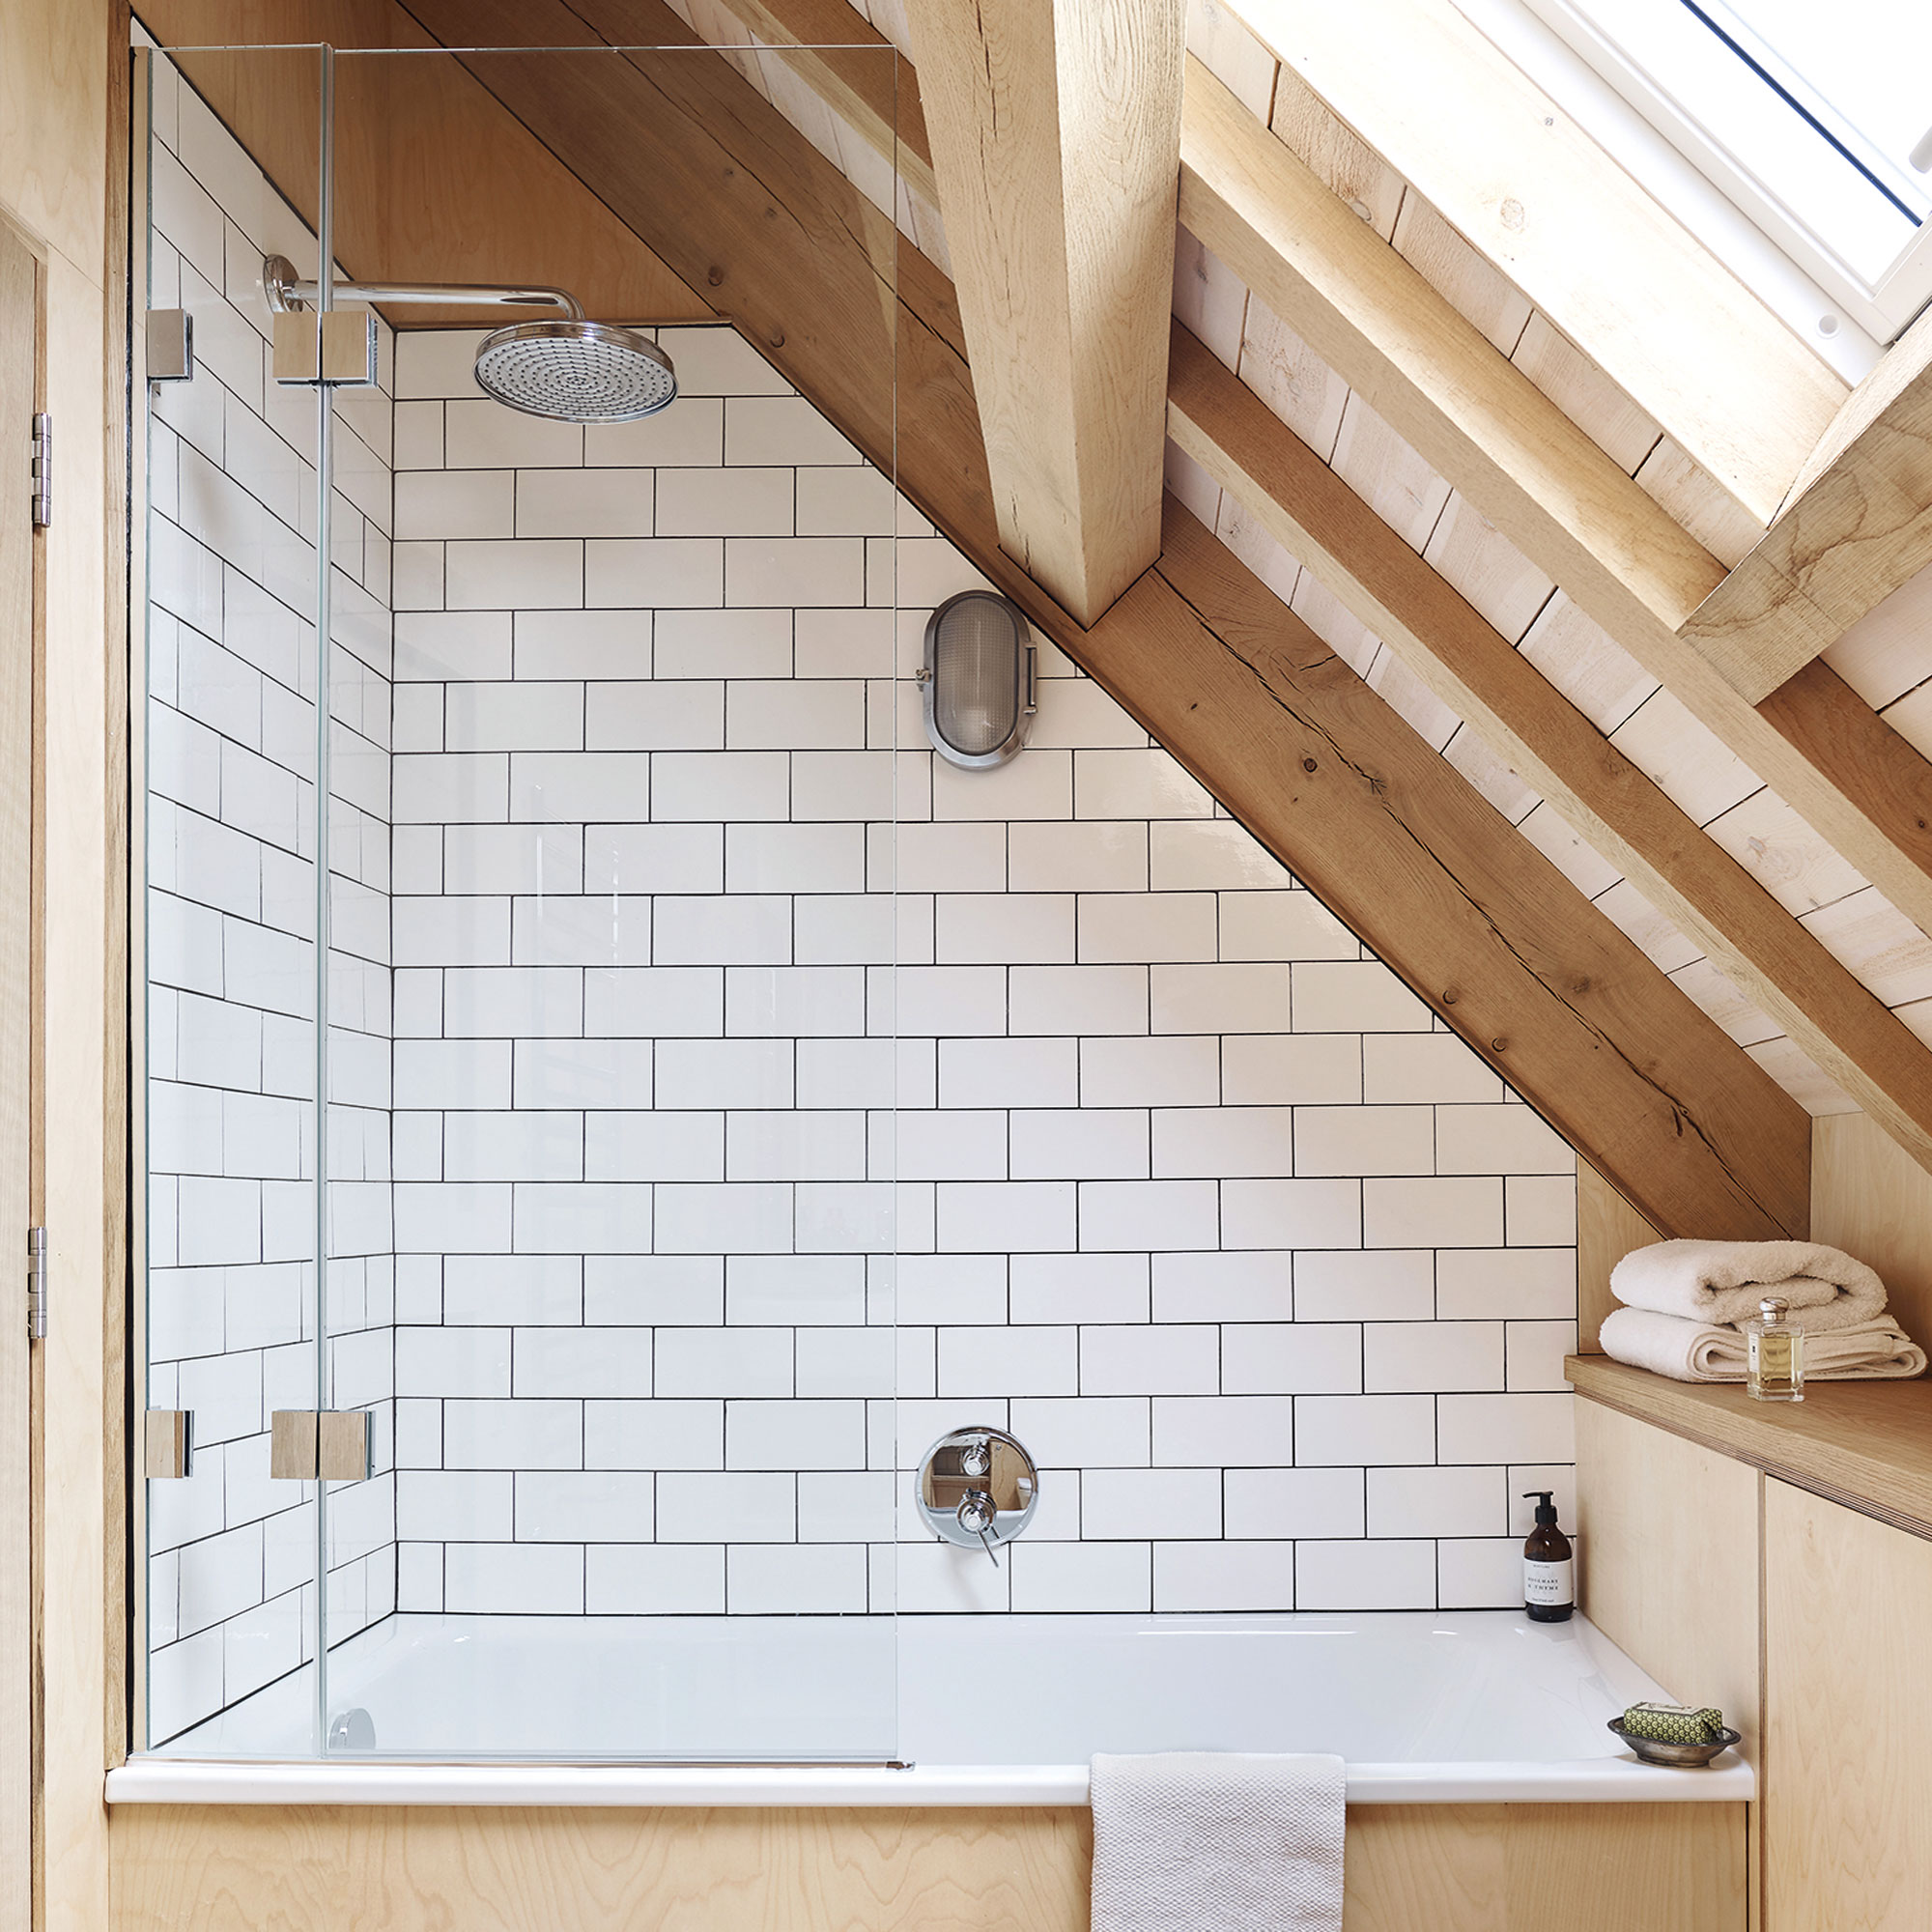 7 Tiny Bathrooms Brimming With Functional and Beautiful Ideas